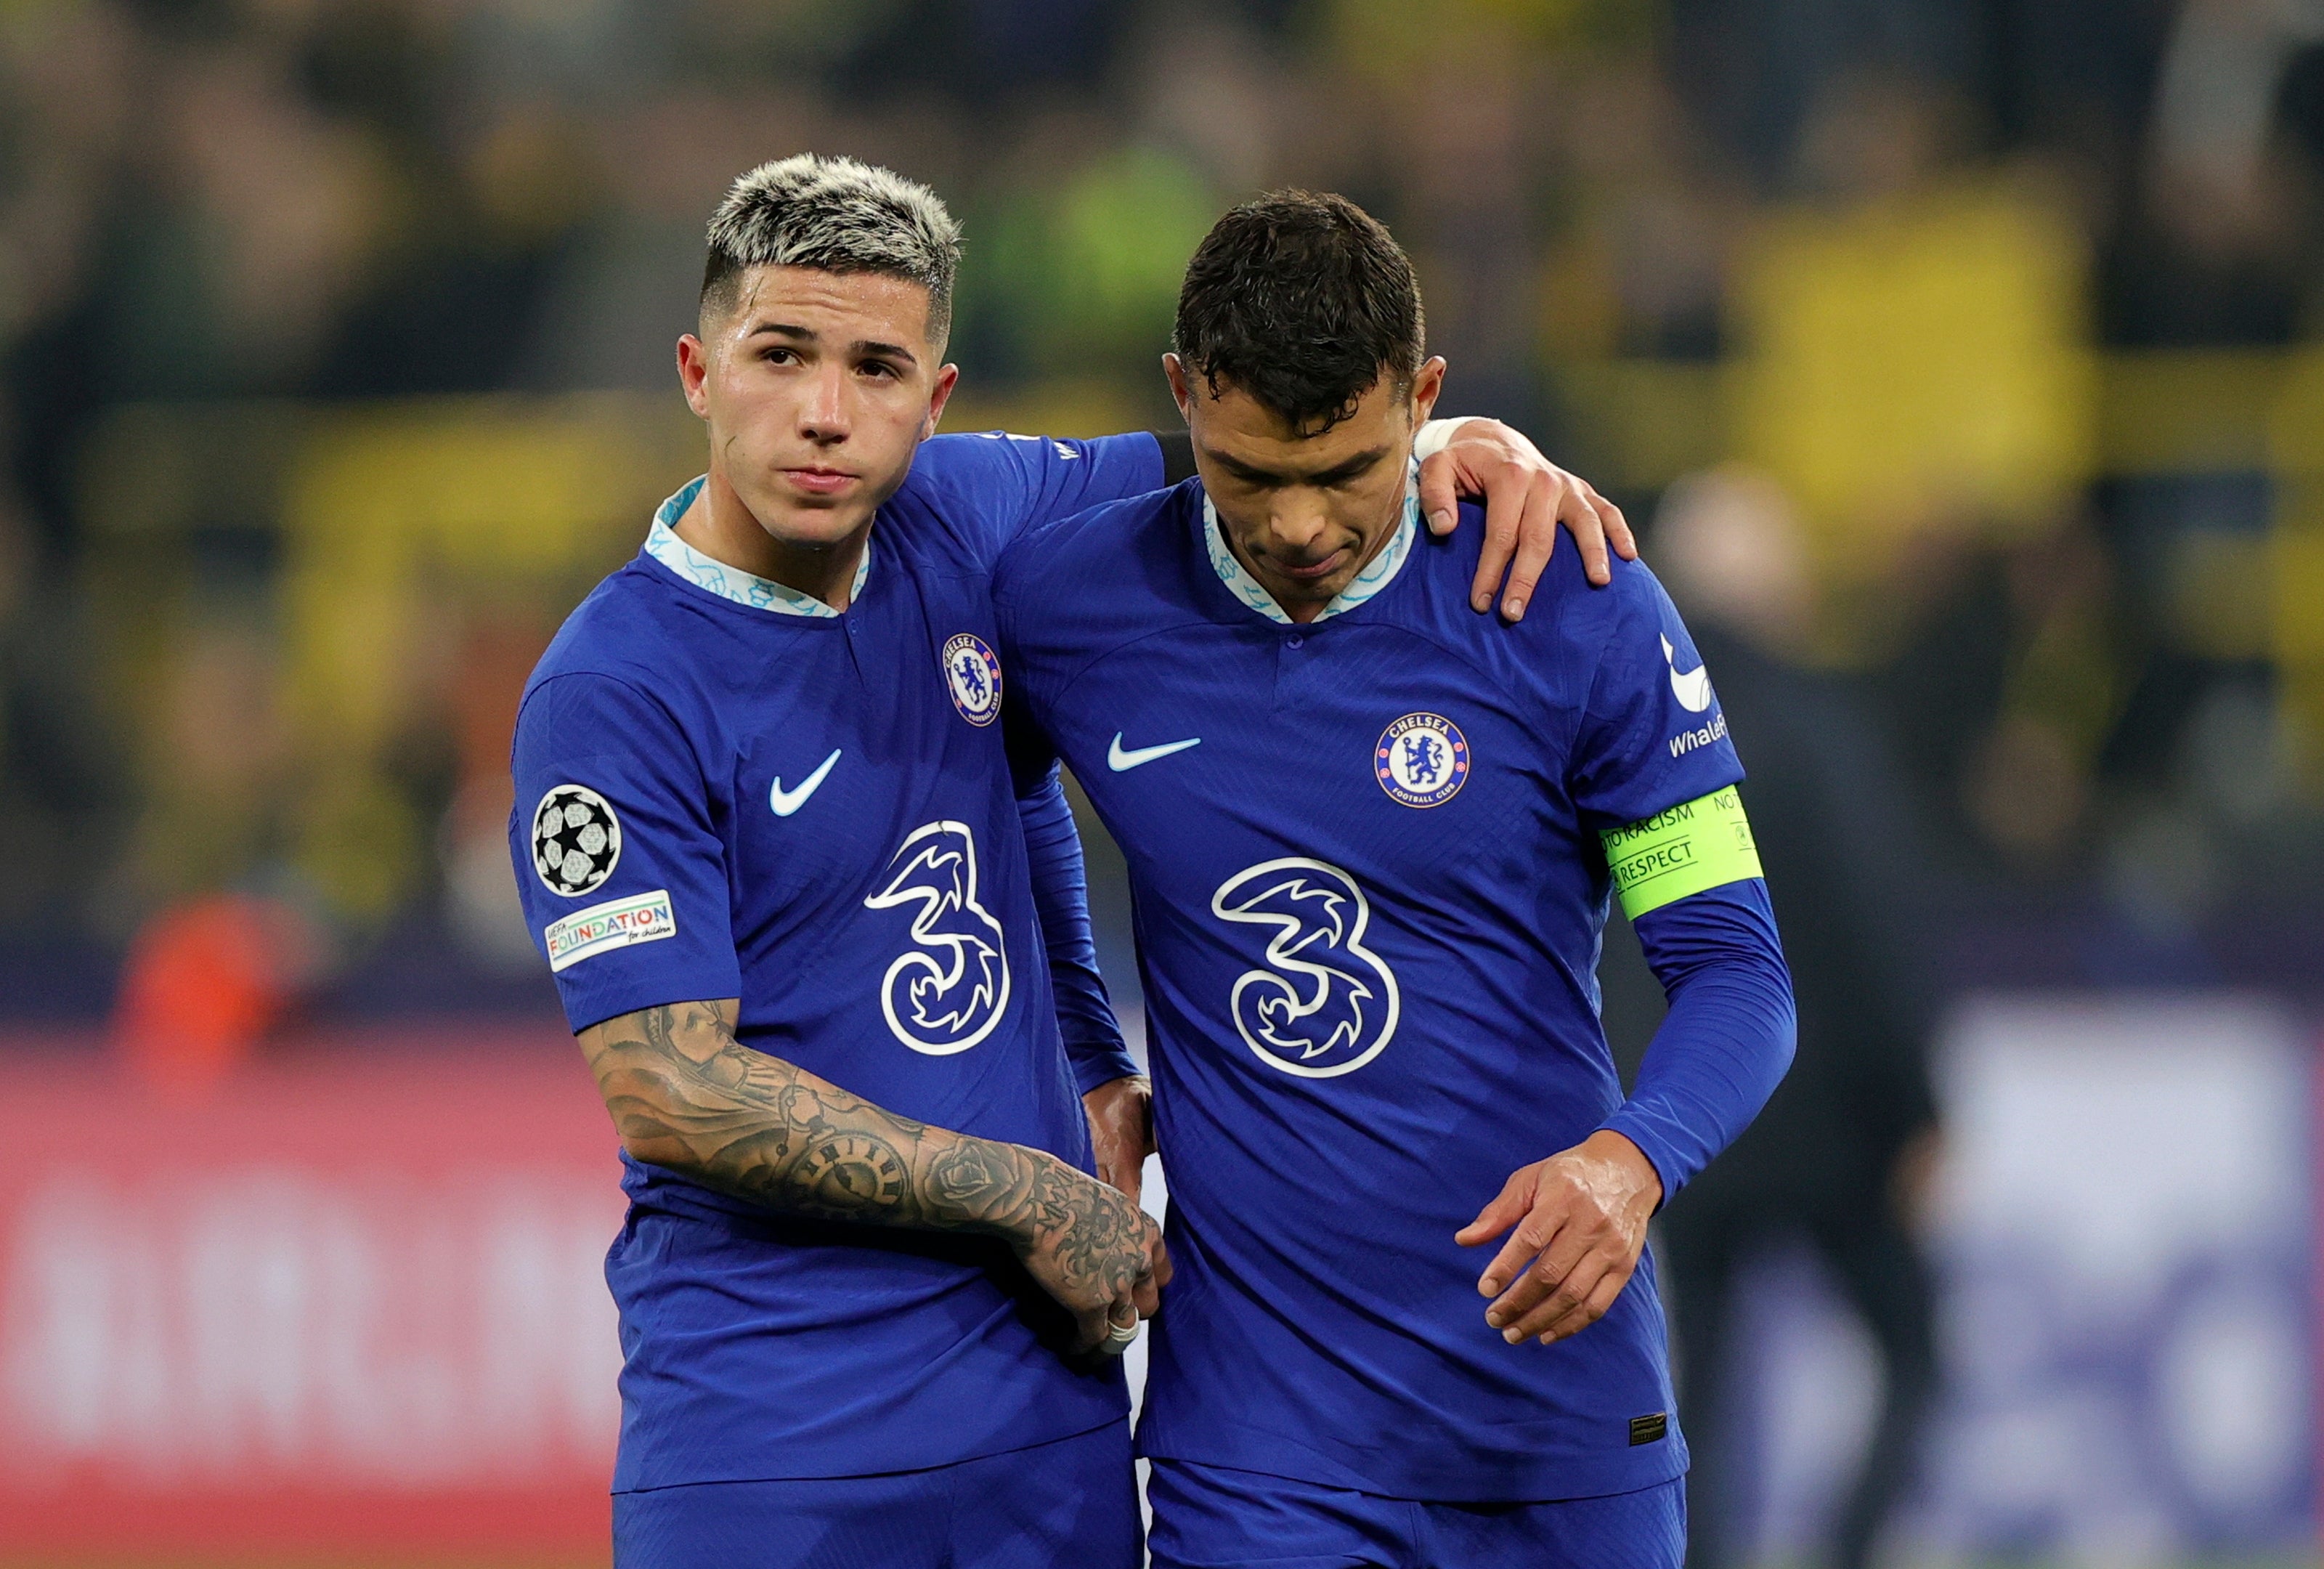 Chelsea slipped to a loss that leaves their Champions League hopes on the brink